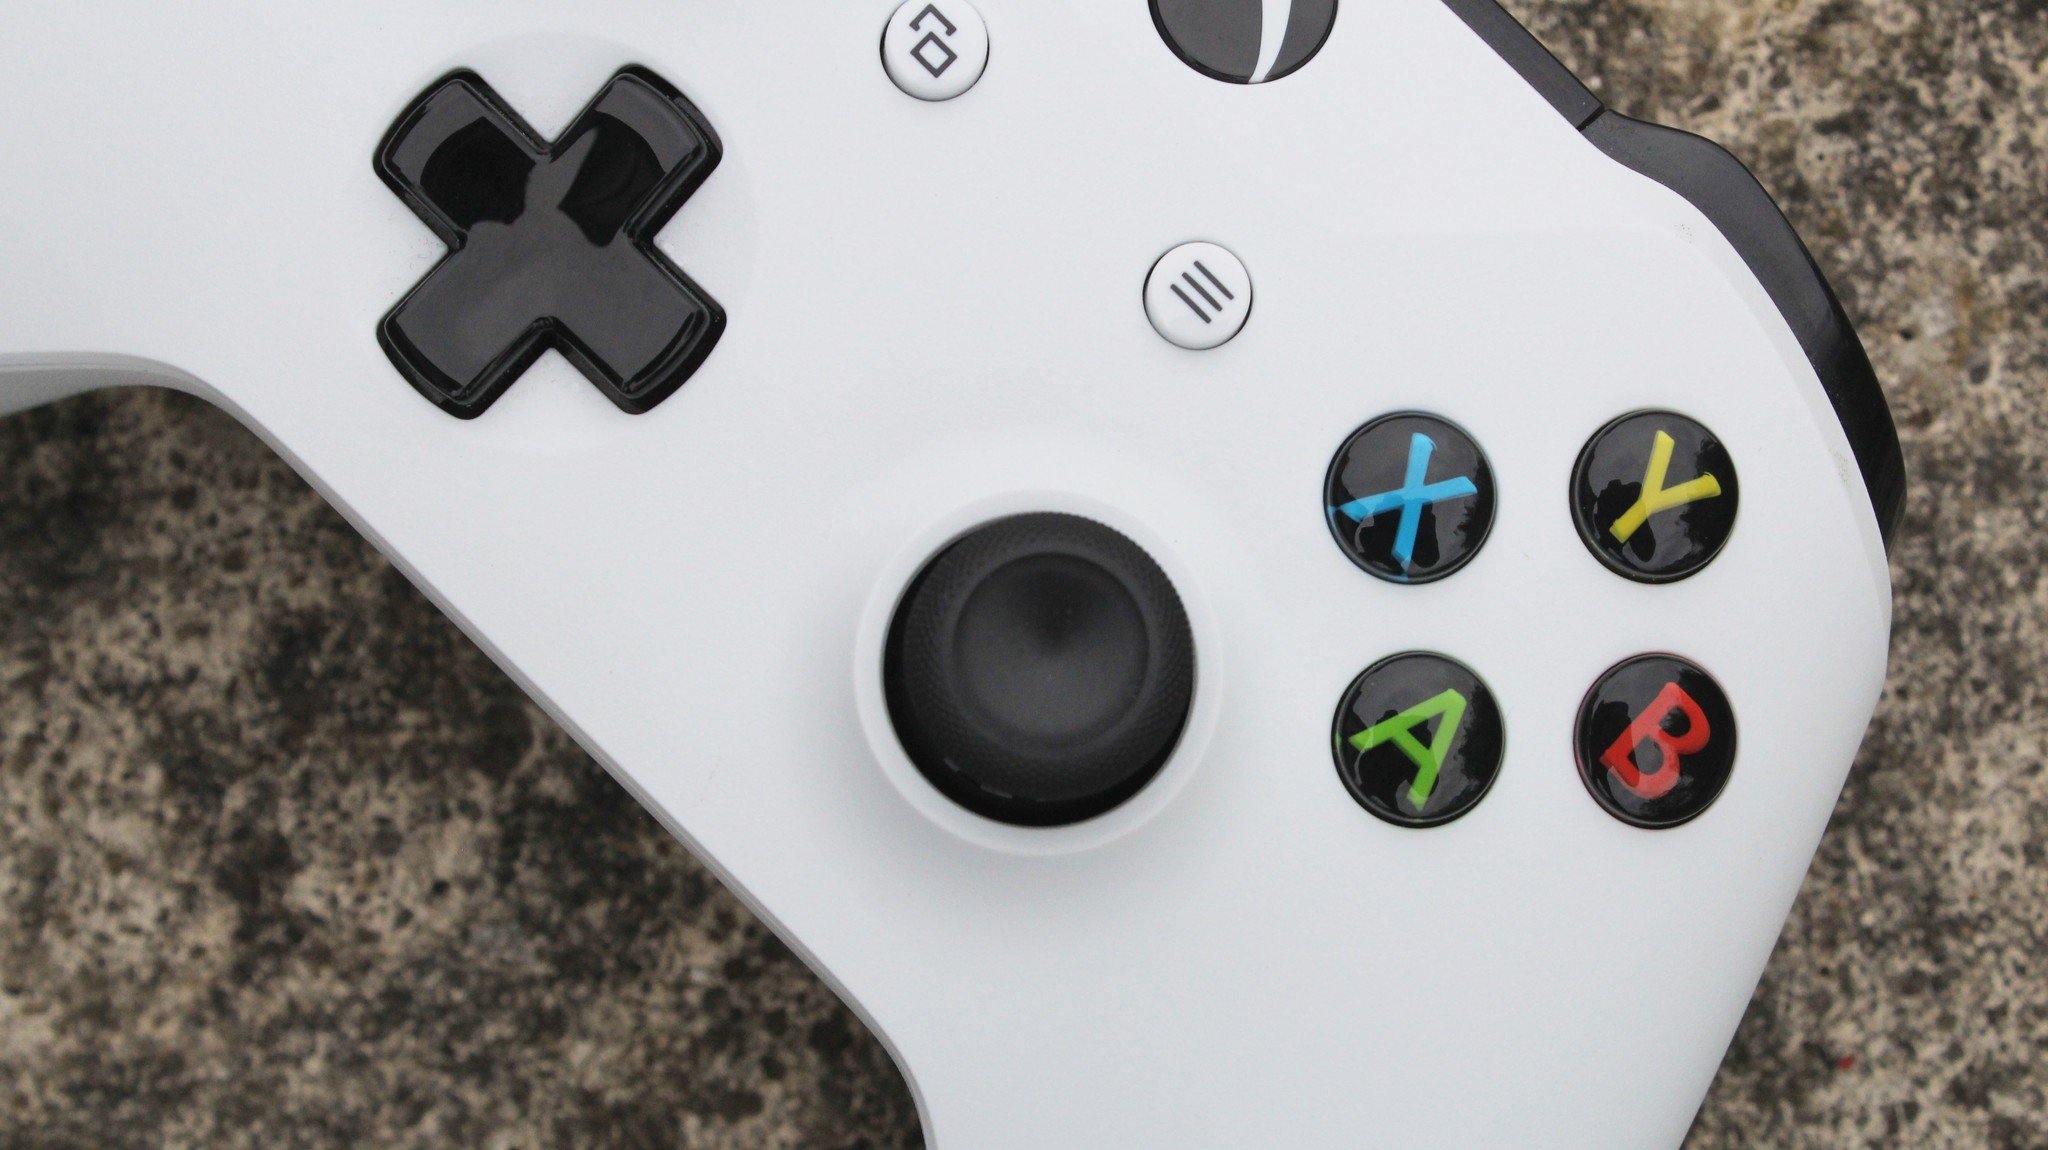 How to use an Xbox One controller on Android